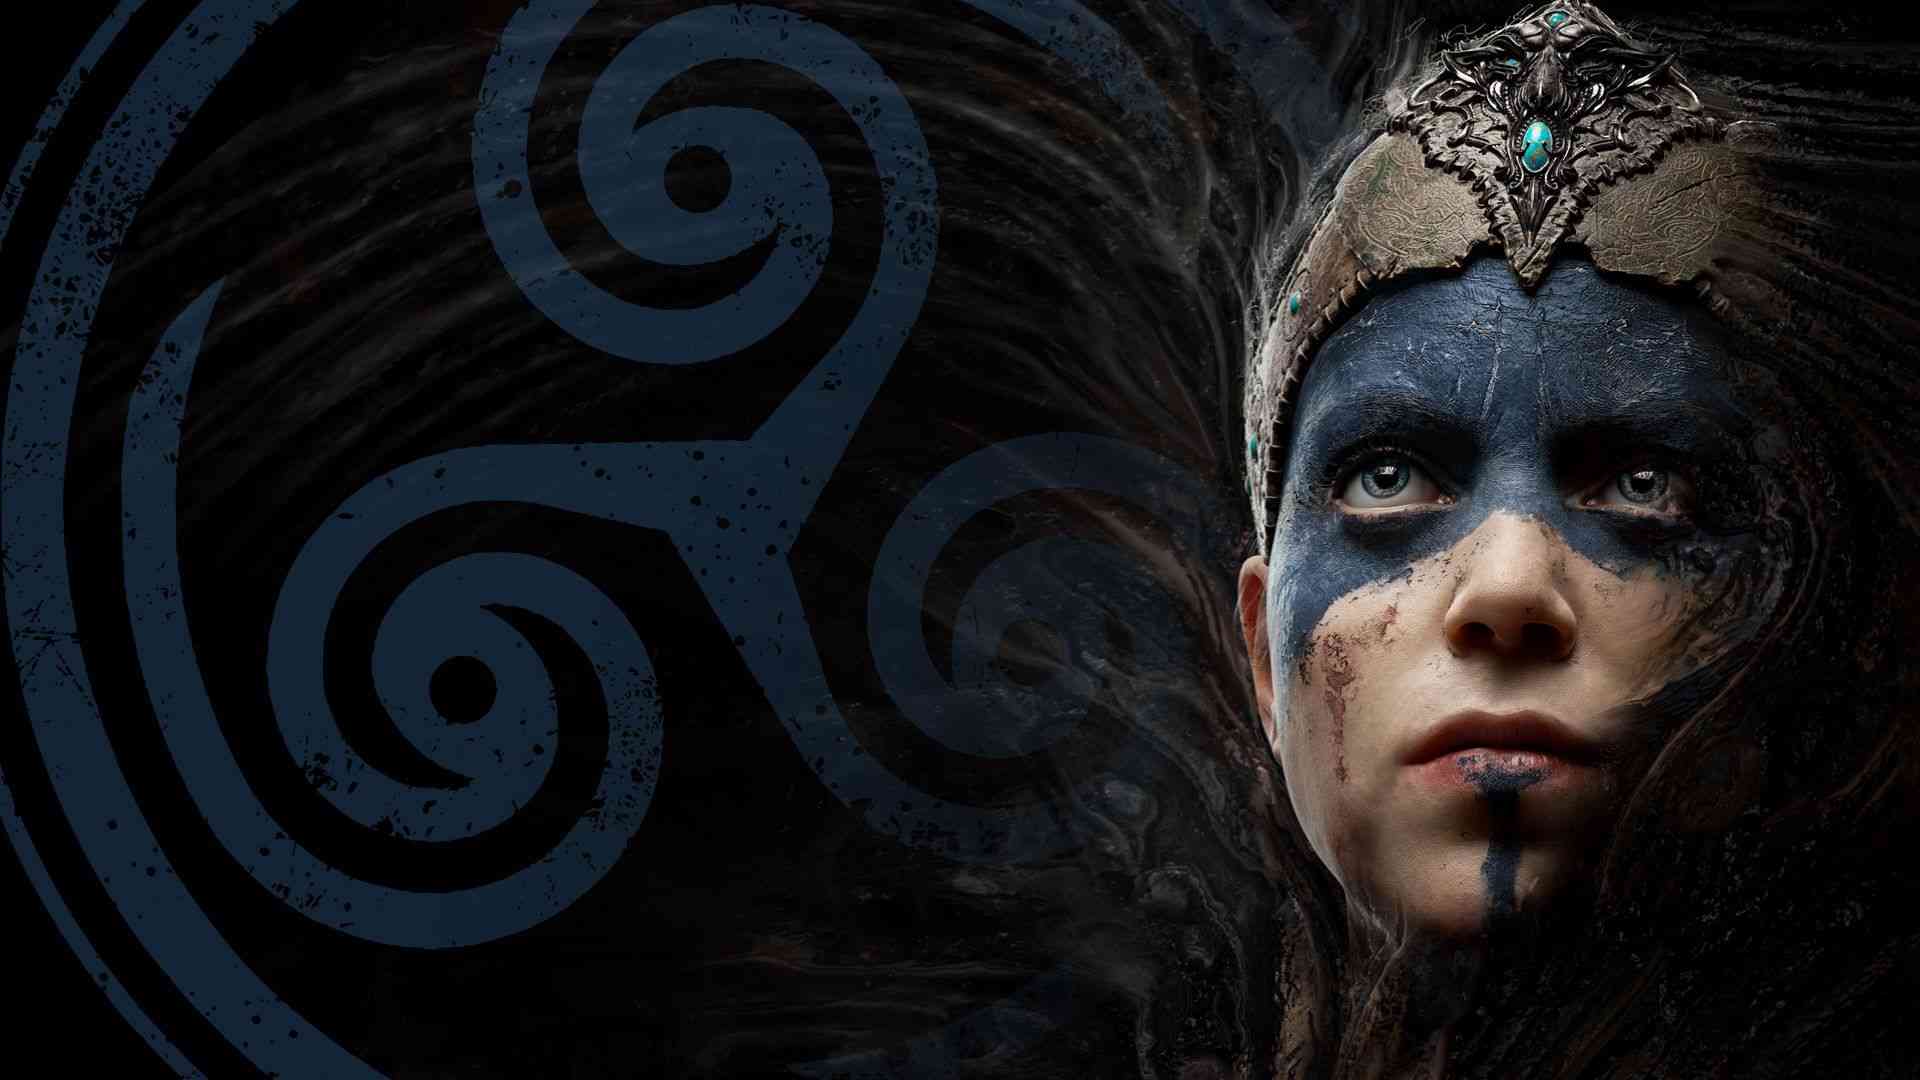 hellblade senuas sacrifice physical ps4 version released today 850 big 1